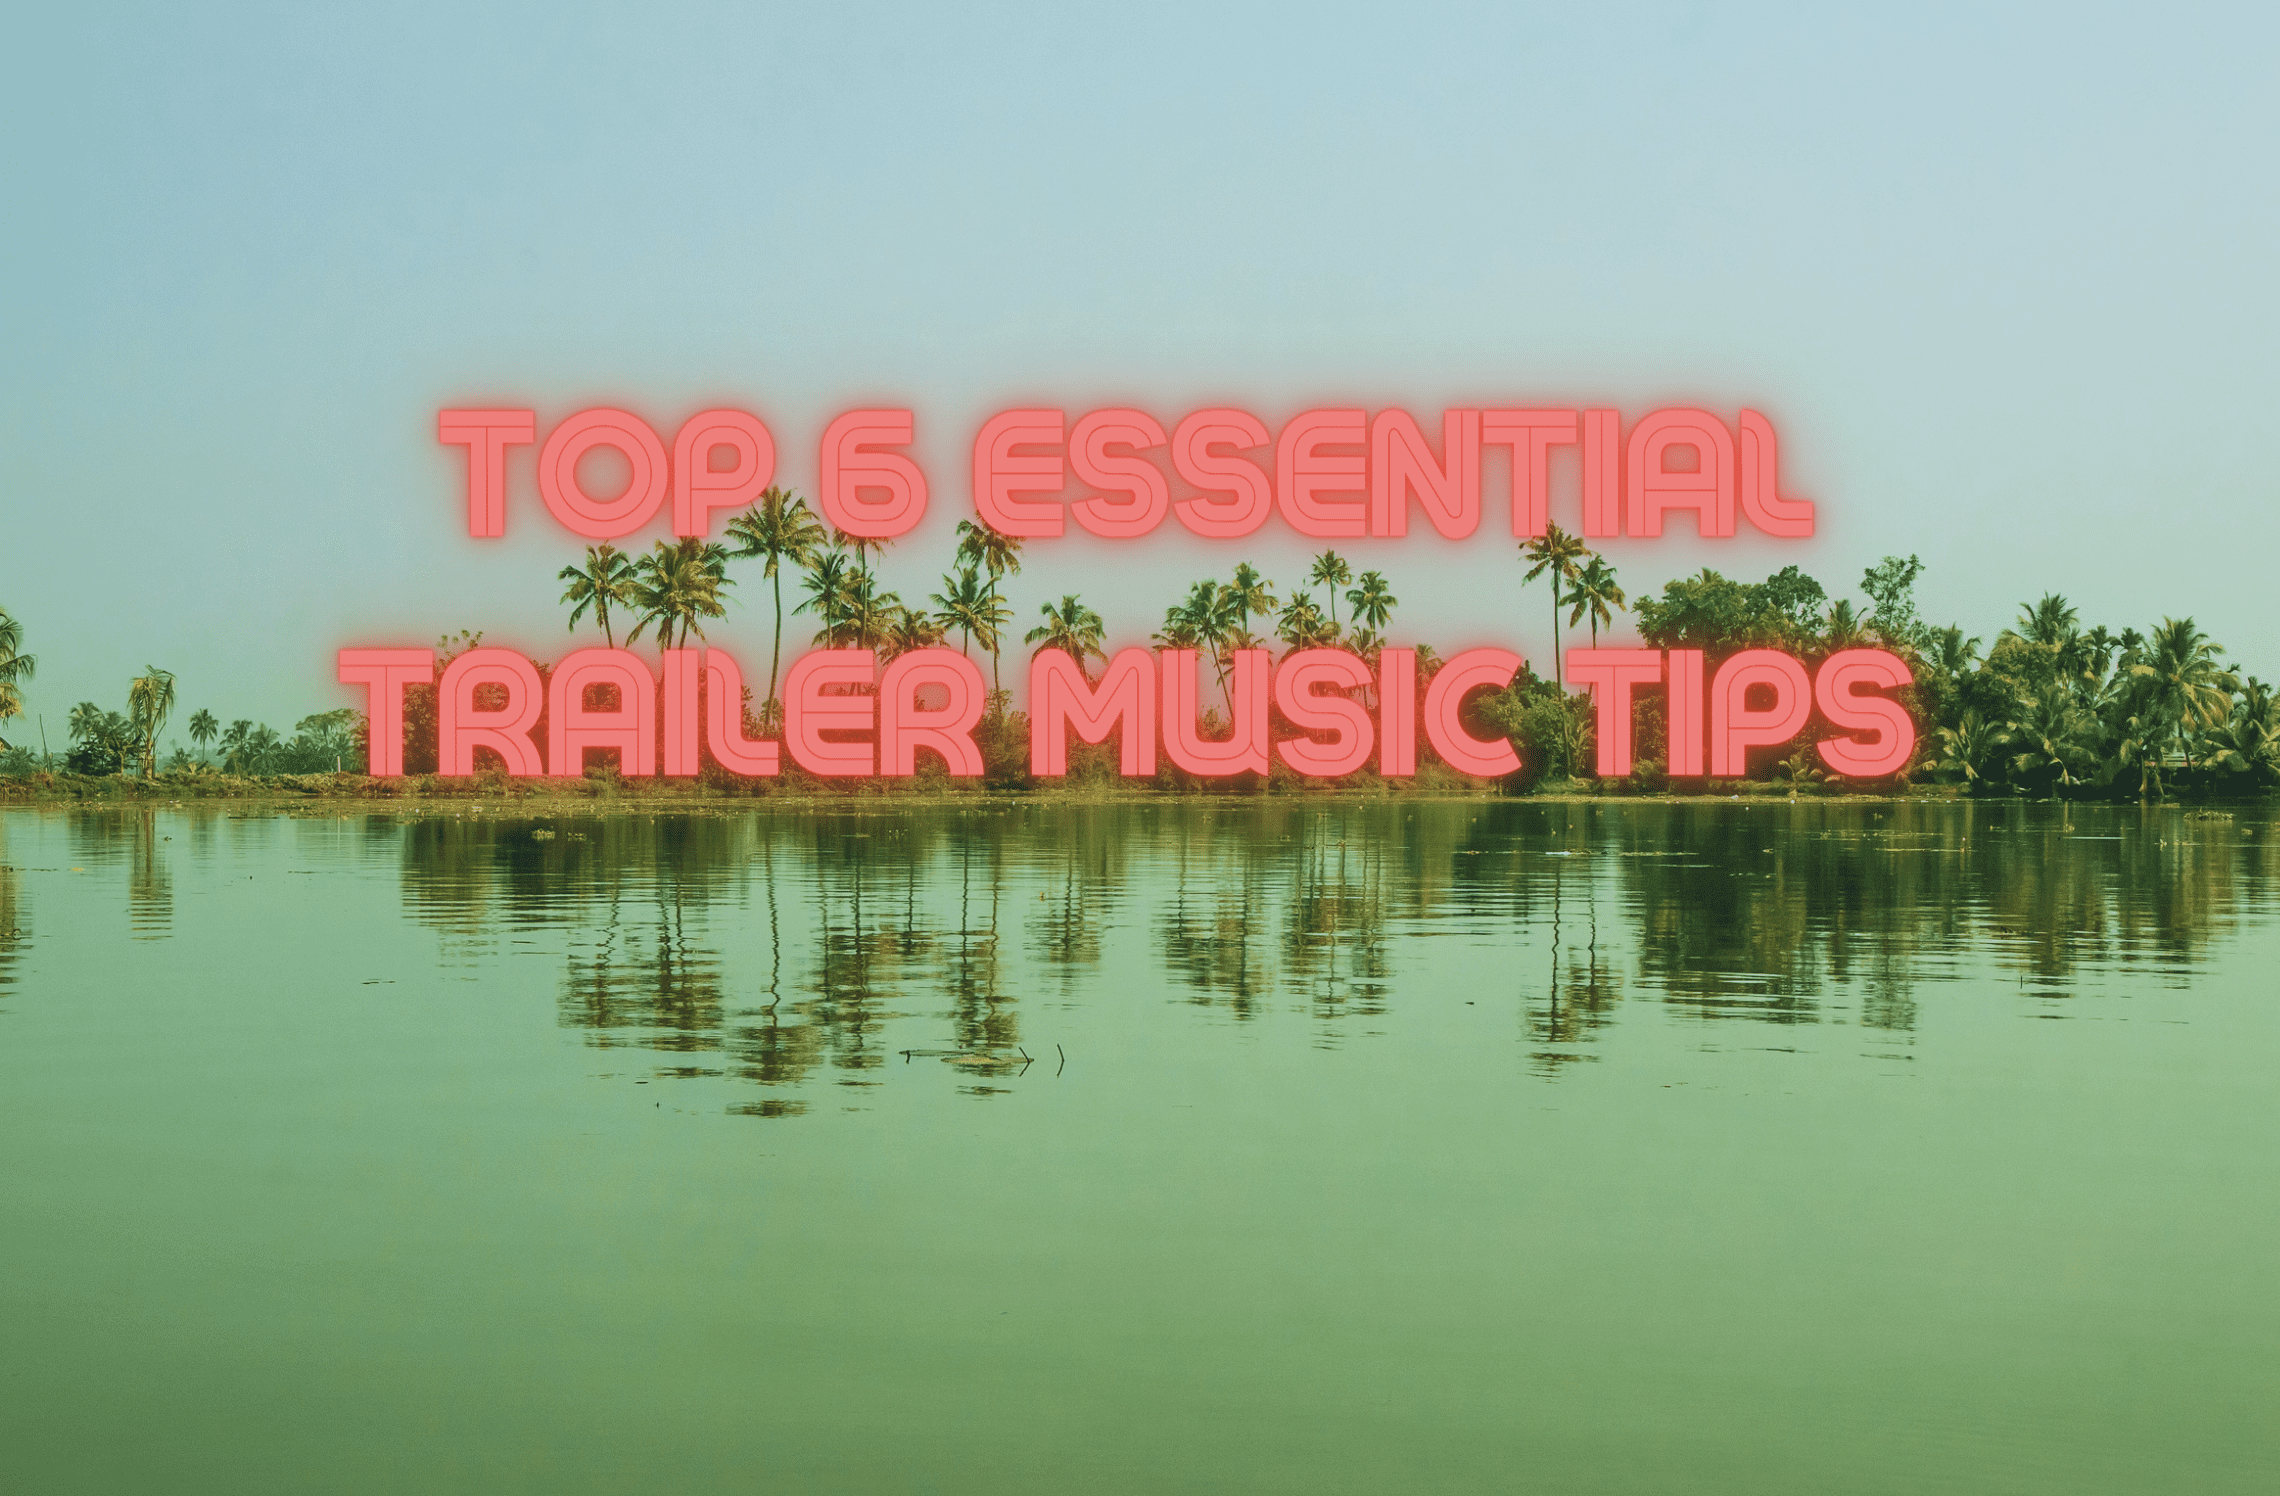 Top 6 Essential Trailer Music Tips